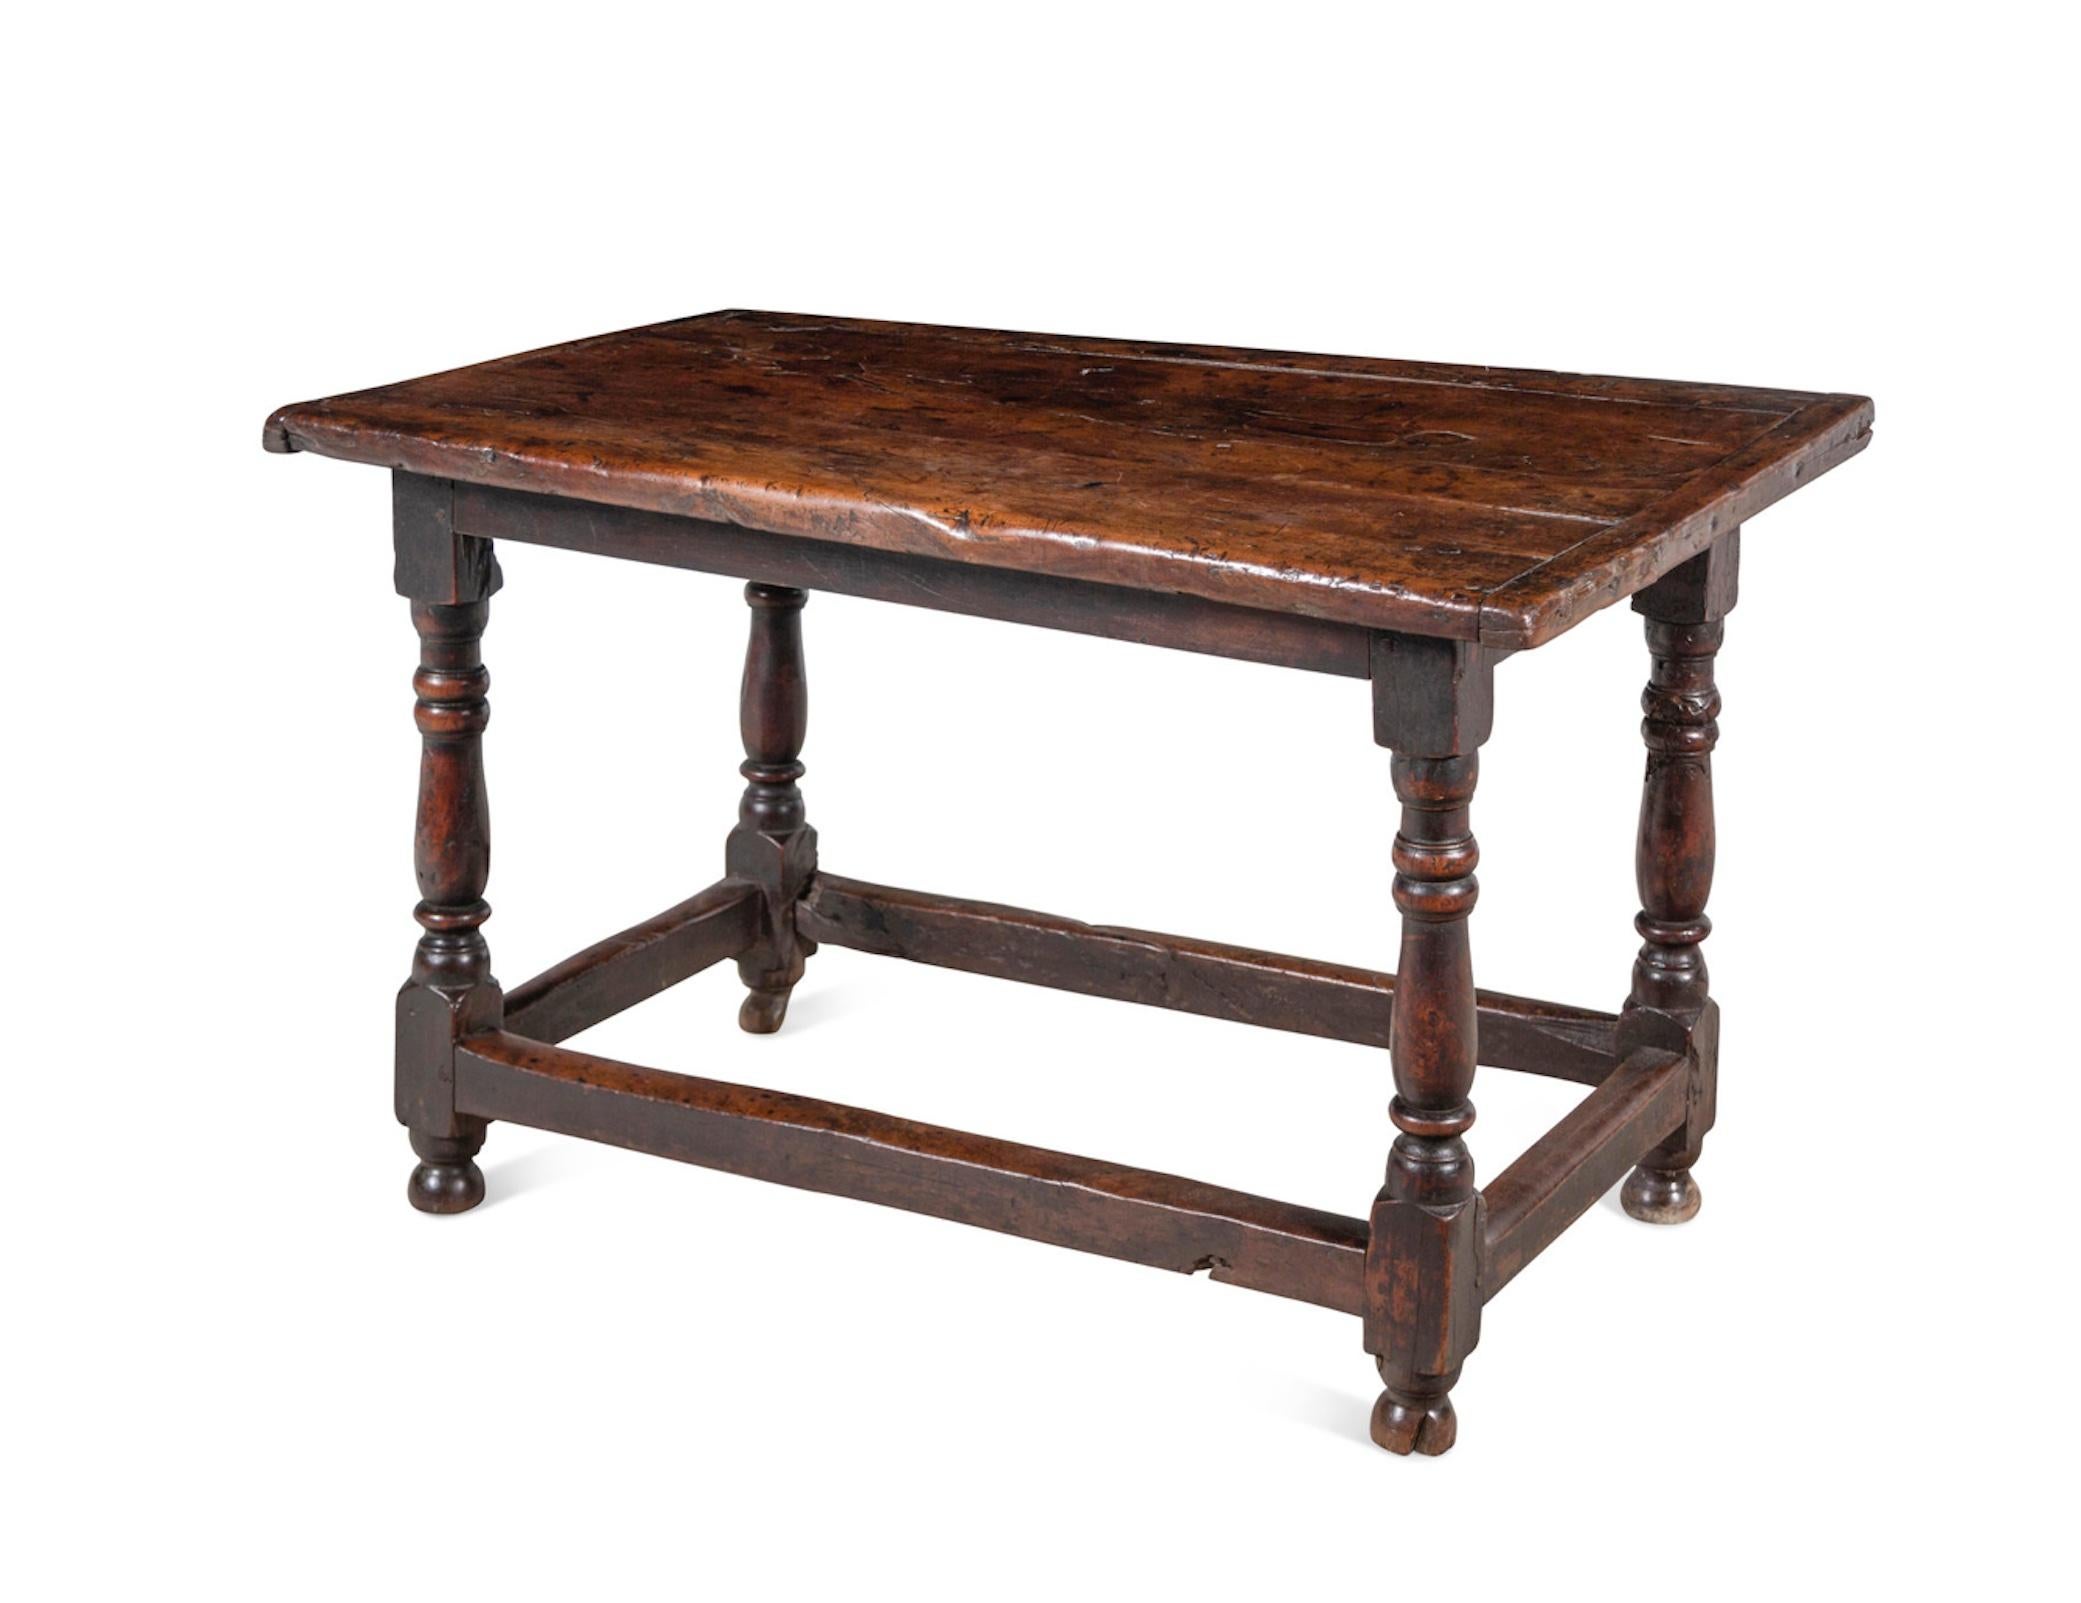 A William and Mary Walnut Table
17th Century
Height 29 x width 47 1/2 x depth 28 inches.